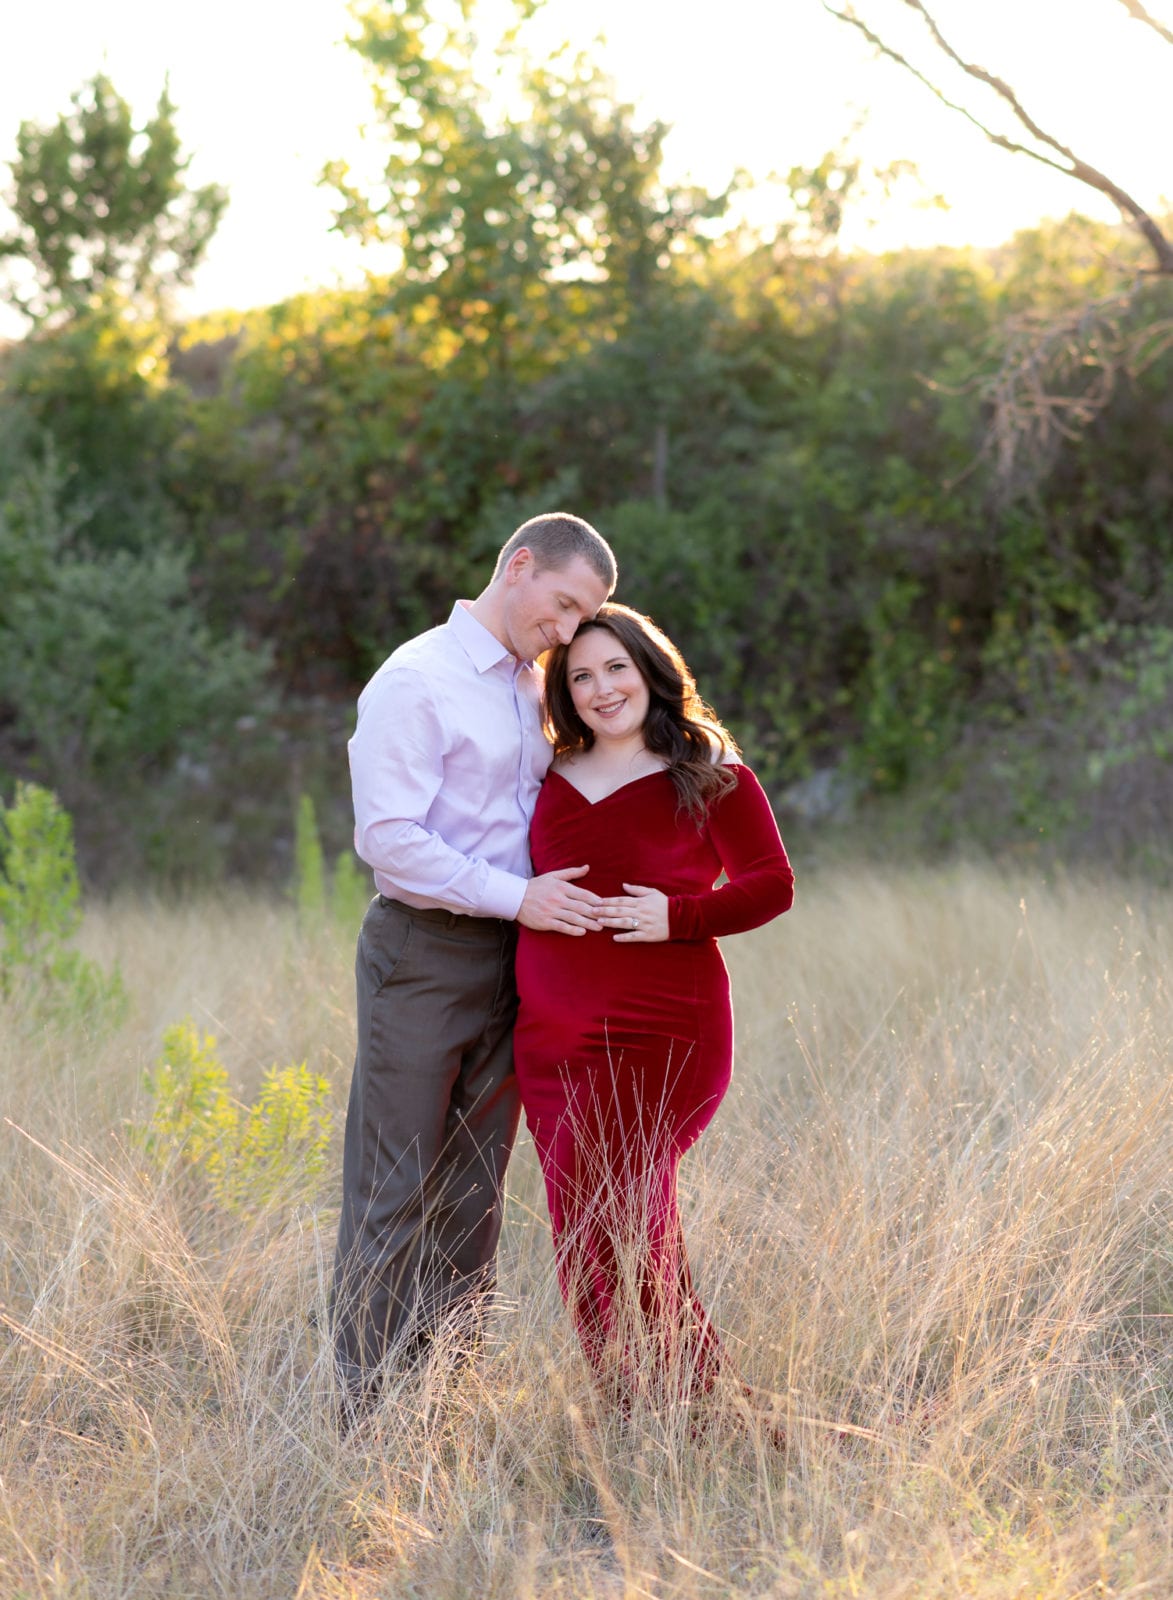 Maternity photos with a red velvet dress.